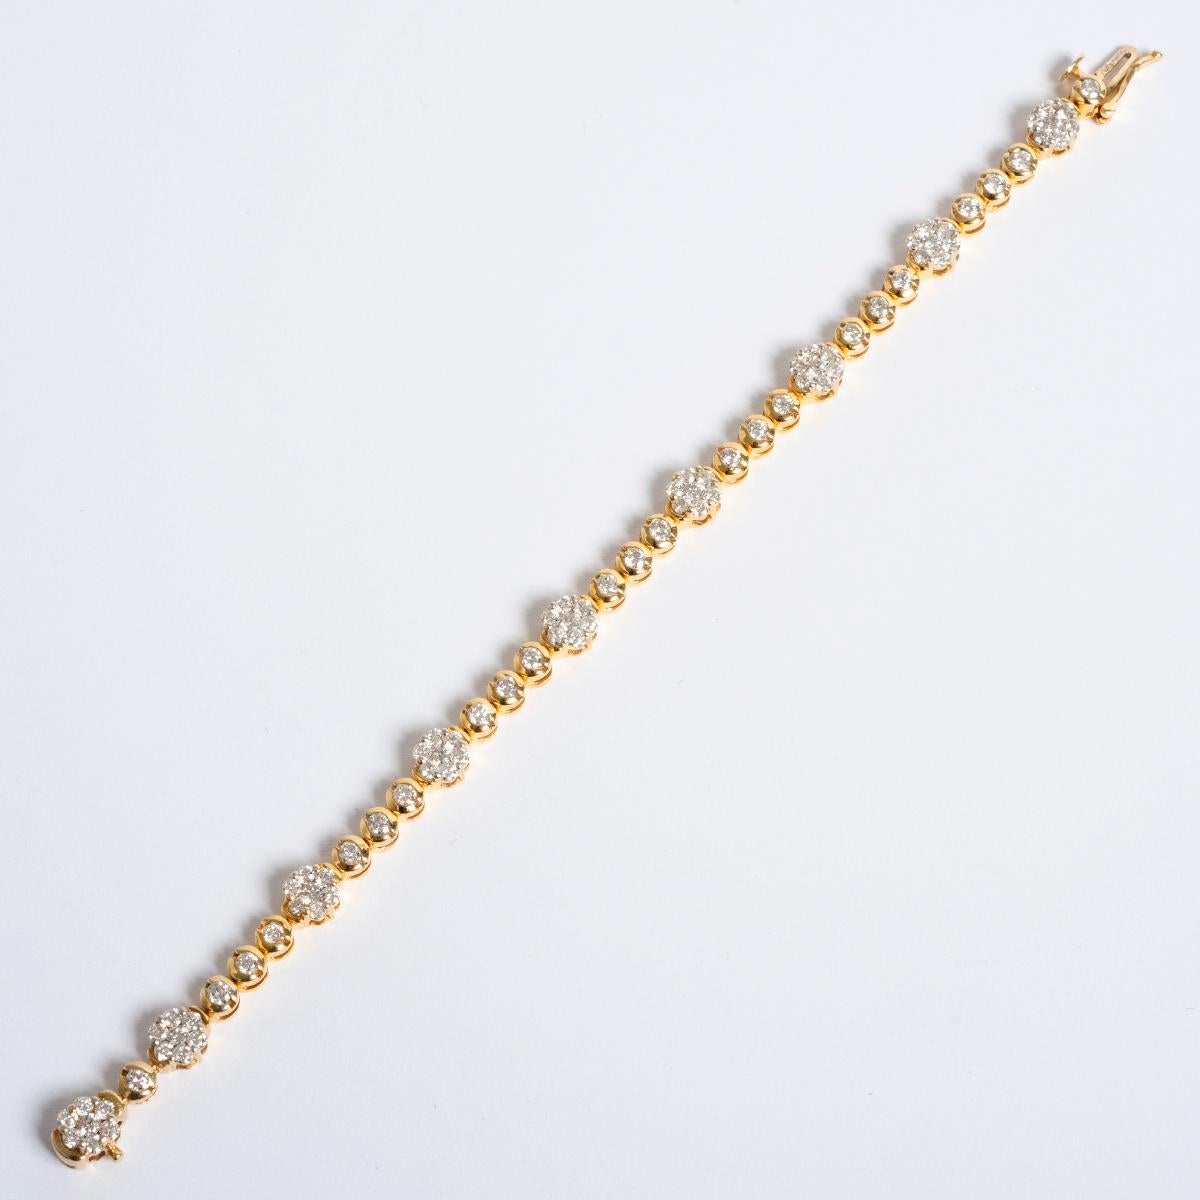 A unique piece within our carefully curated Vintage & Prestige fine jewellery collection, we are delighted to present the following: This pretty Diamond Daisy Bracelet is set in 14K Yellow Gold wit 3.75ct in diamonds. The bracelet measures 160mm. A